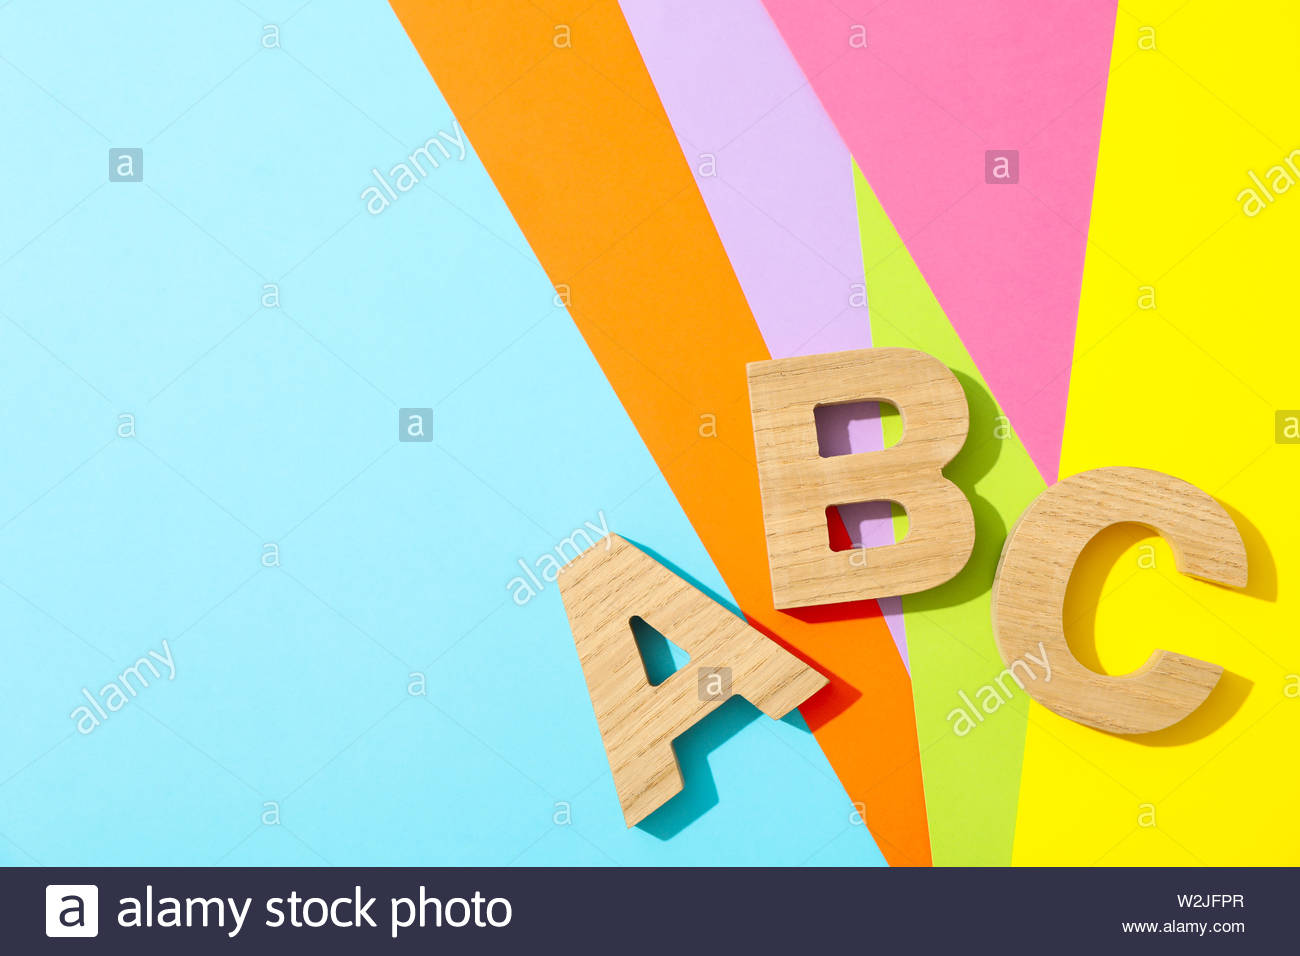 Letters Abc Lined With Wooden On Multicolor Background